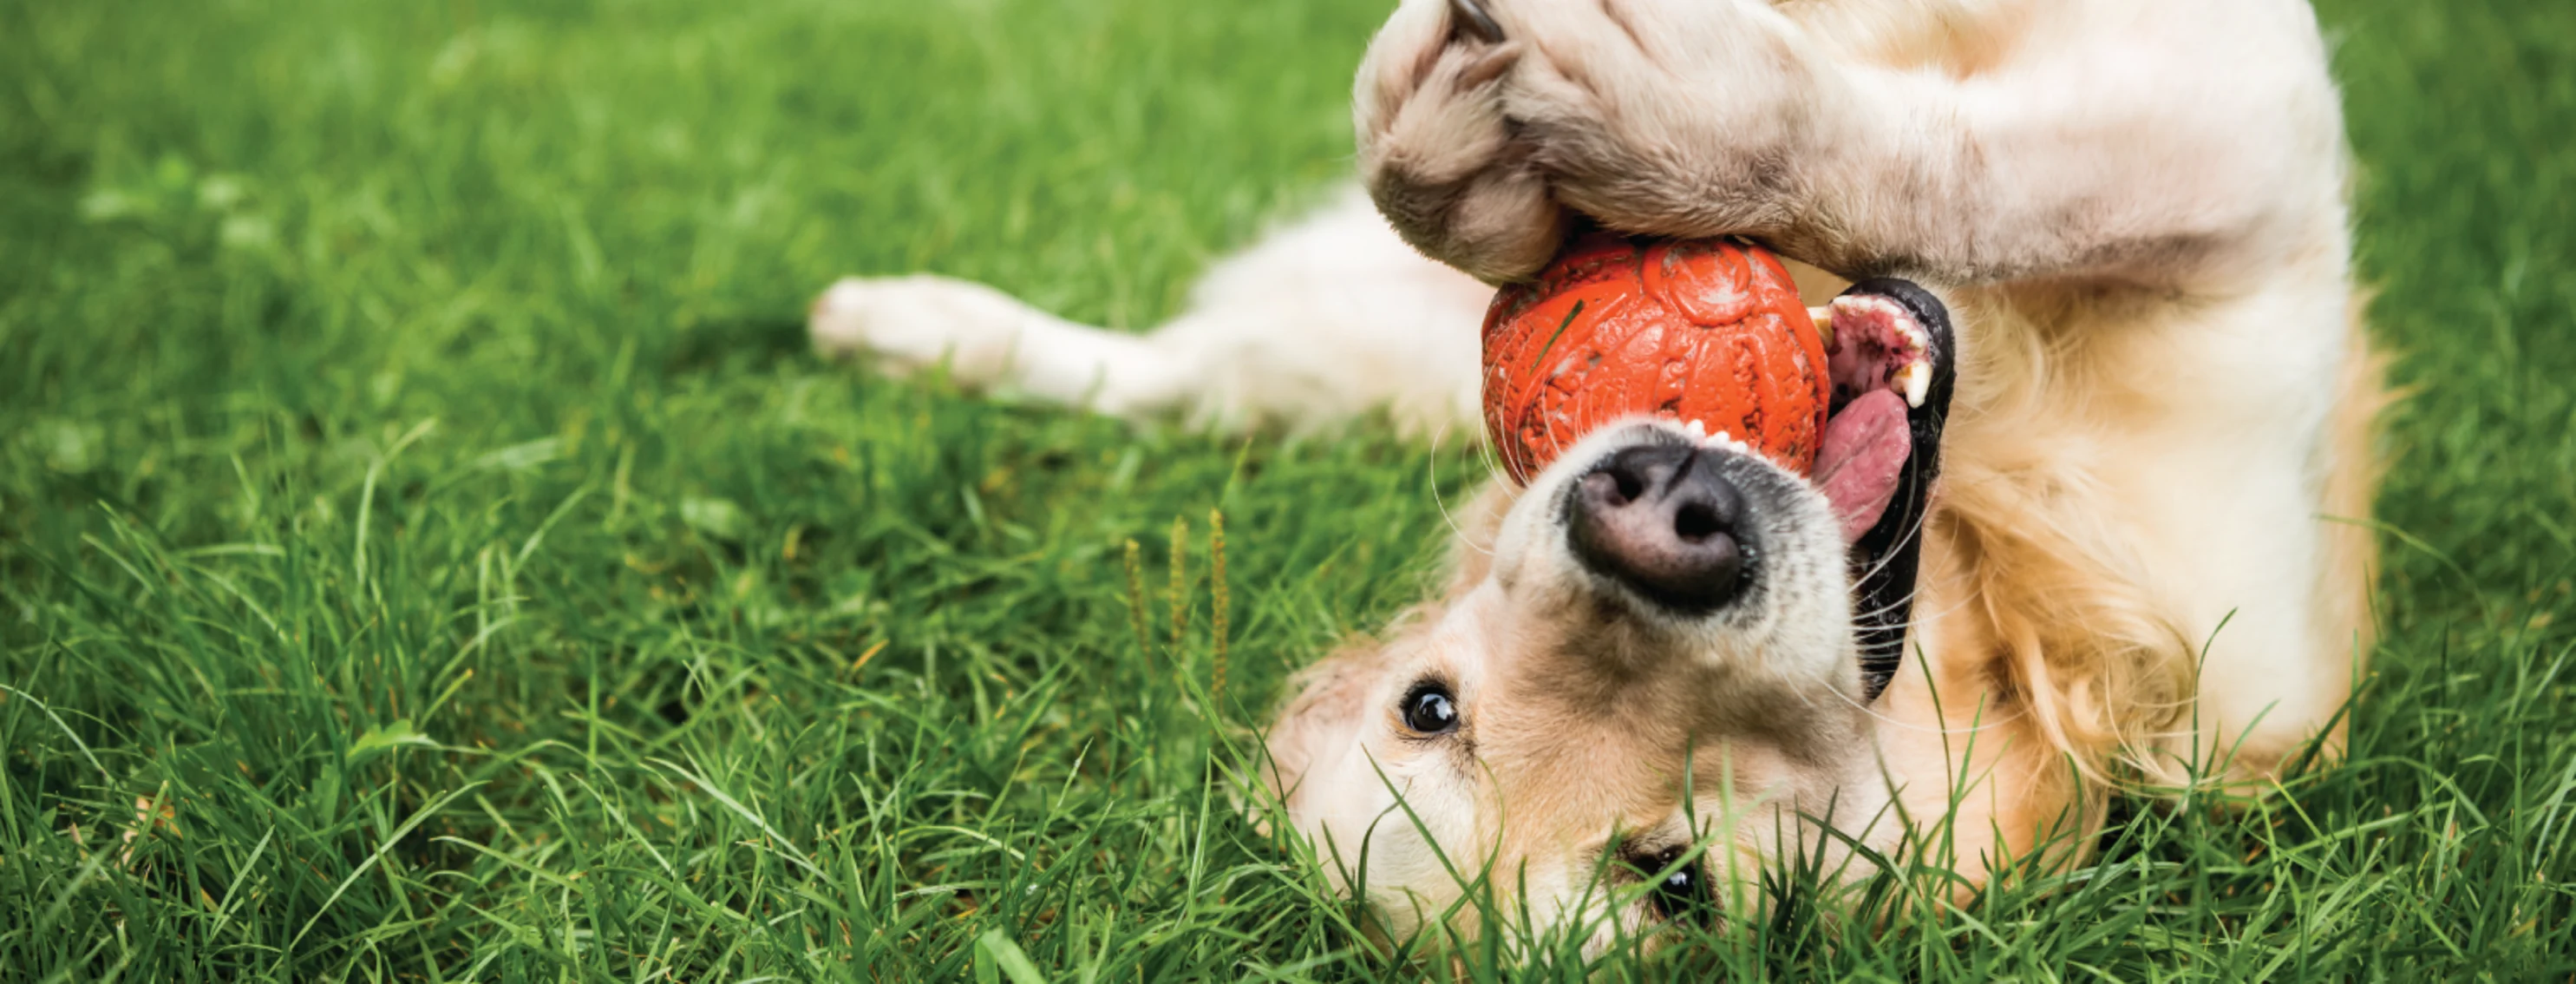 Dog with Ball Laying Down Grass